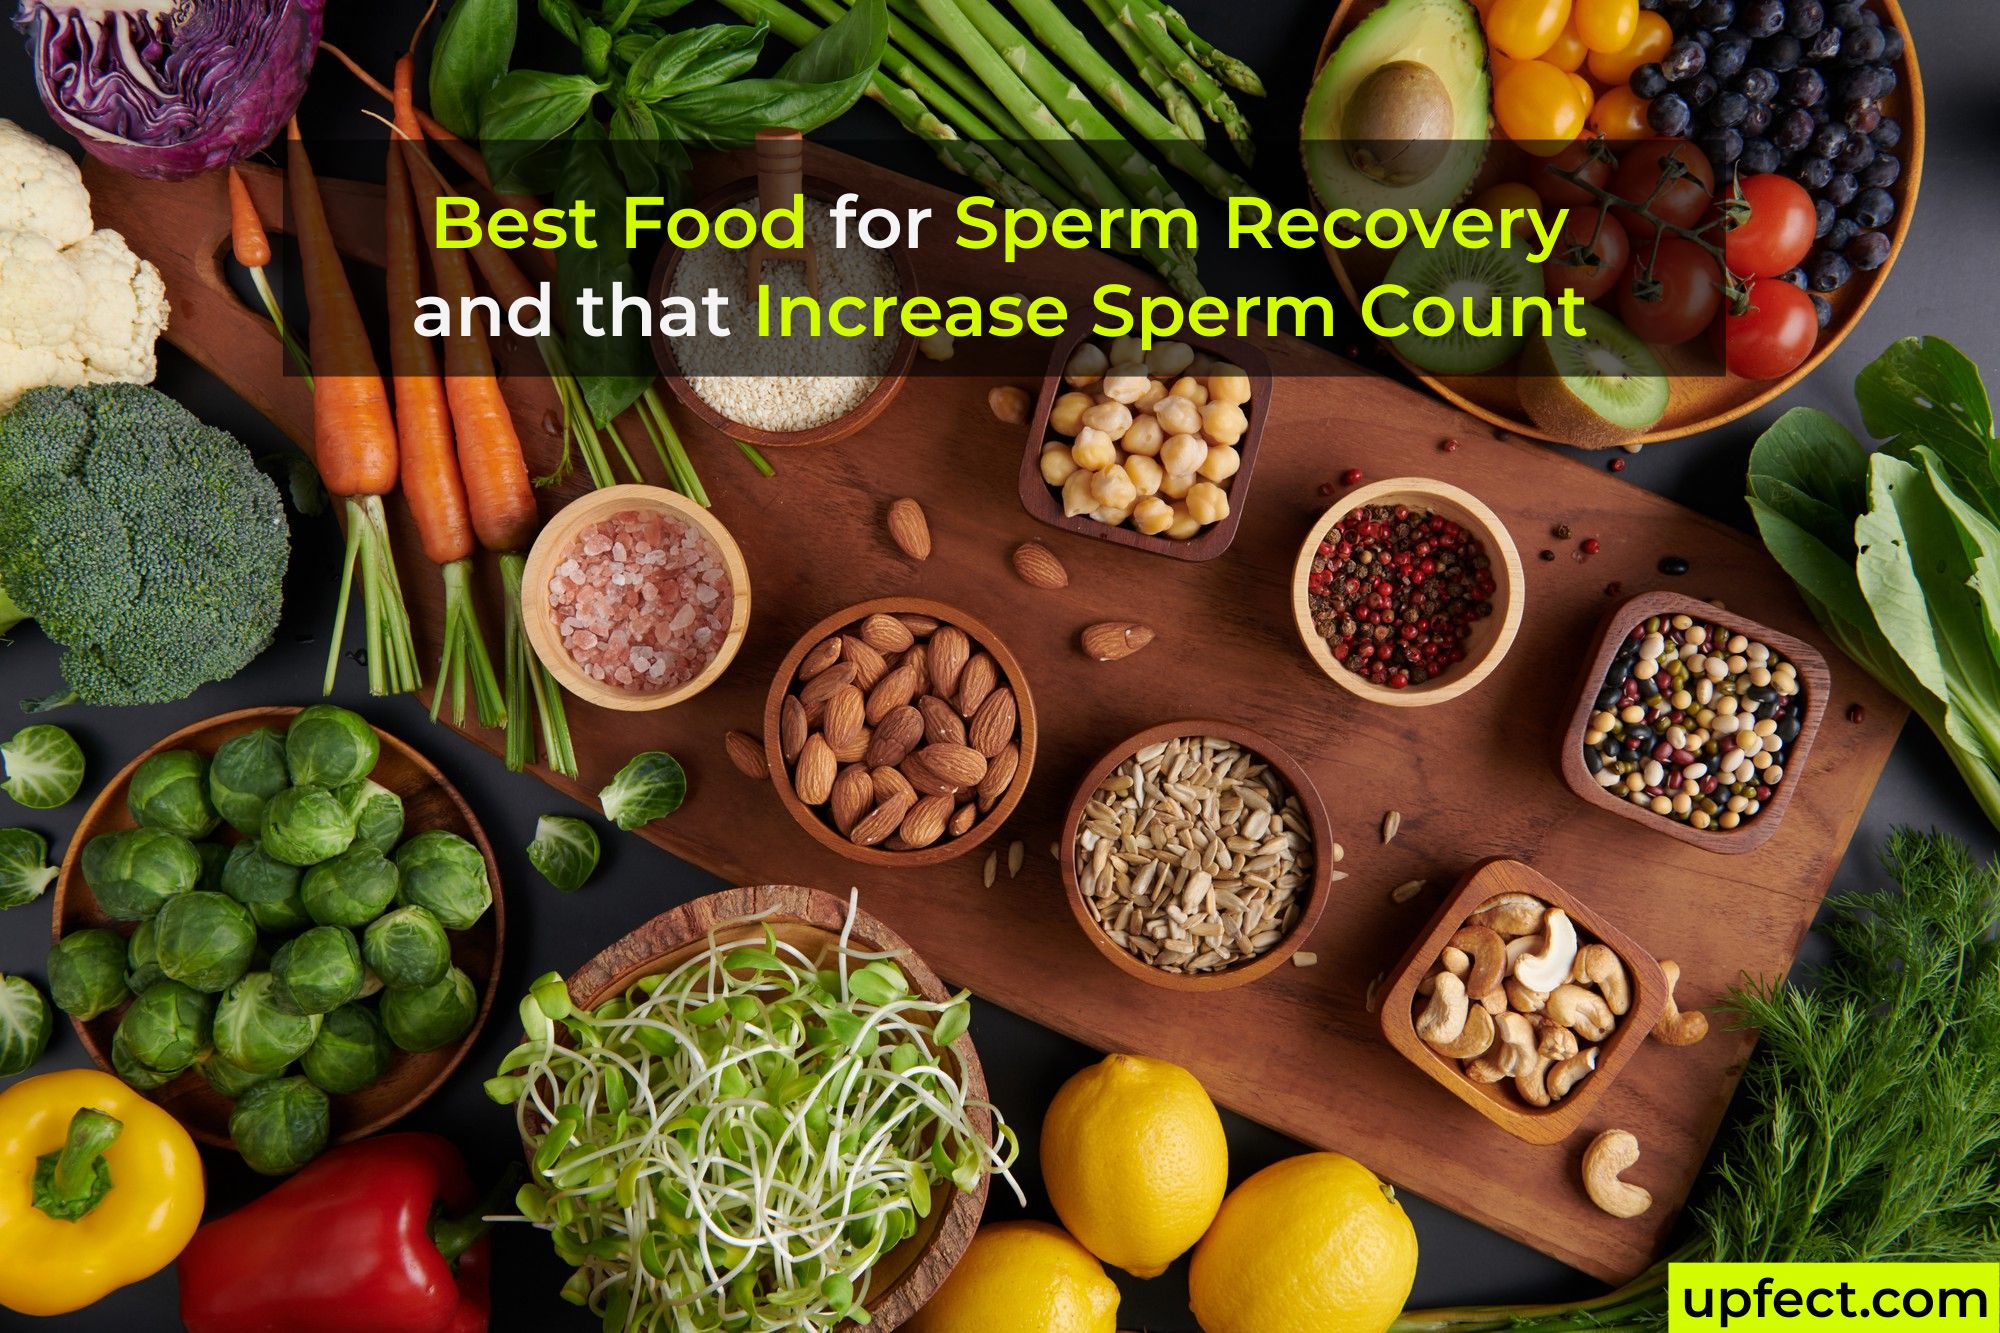 Best Food for Sperm Recovery